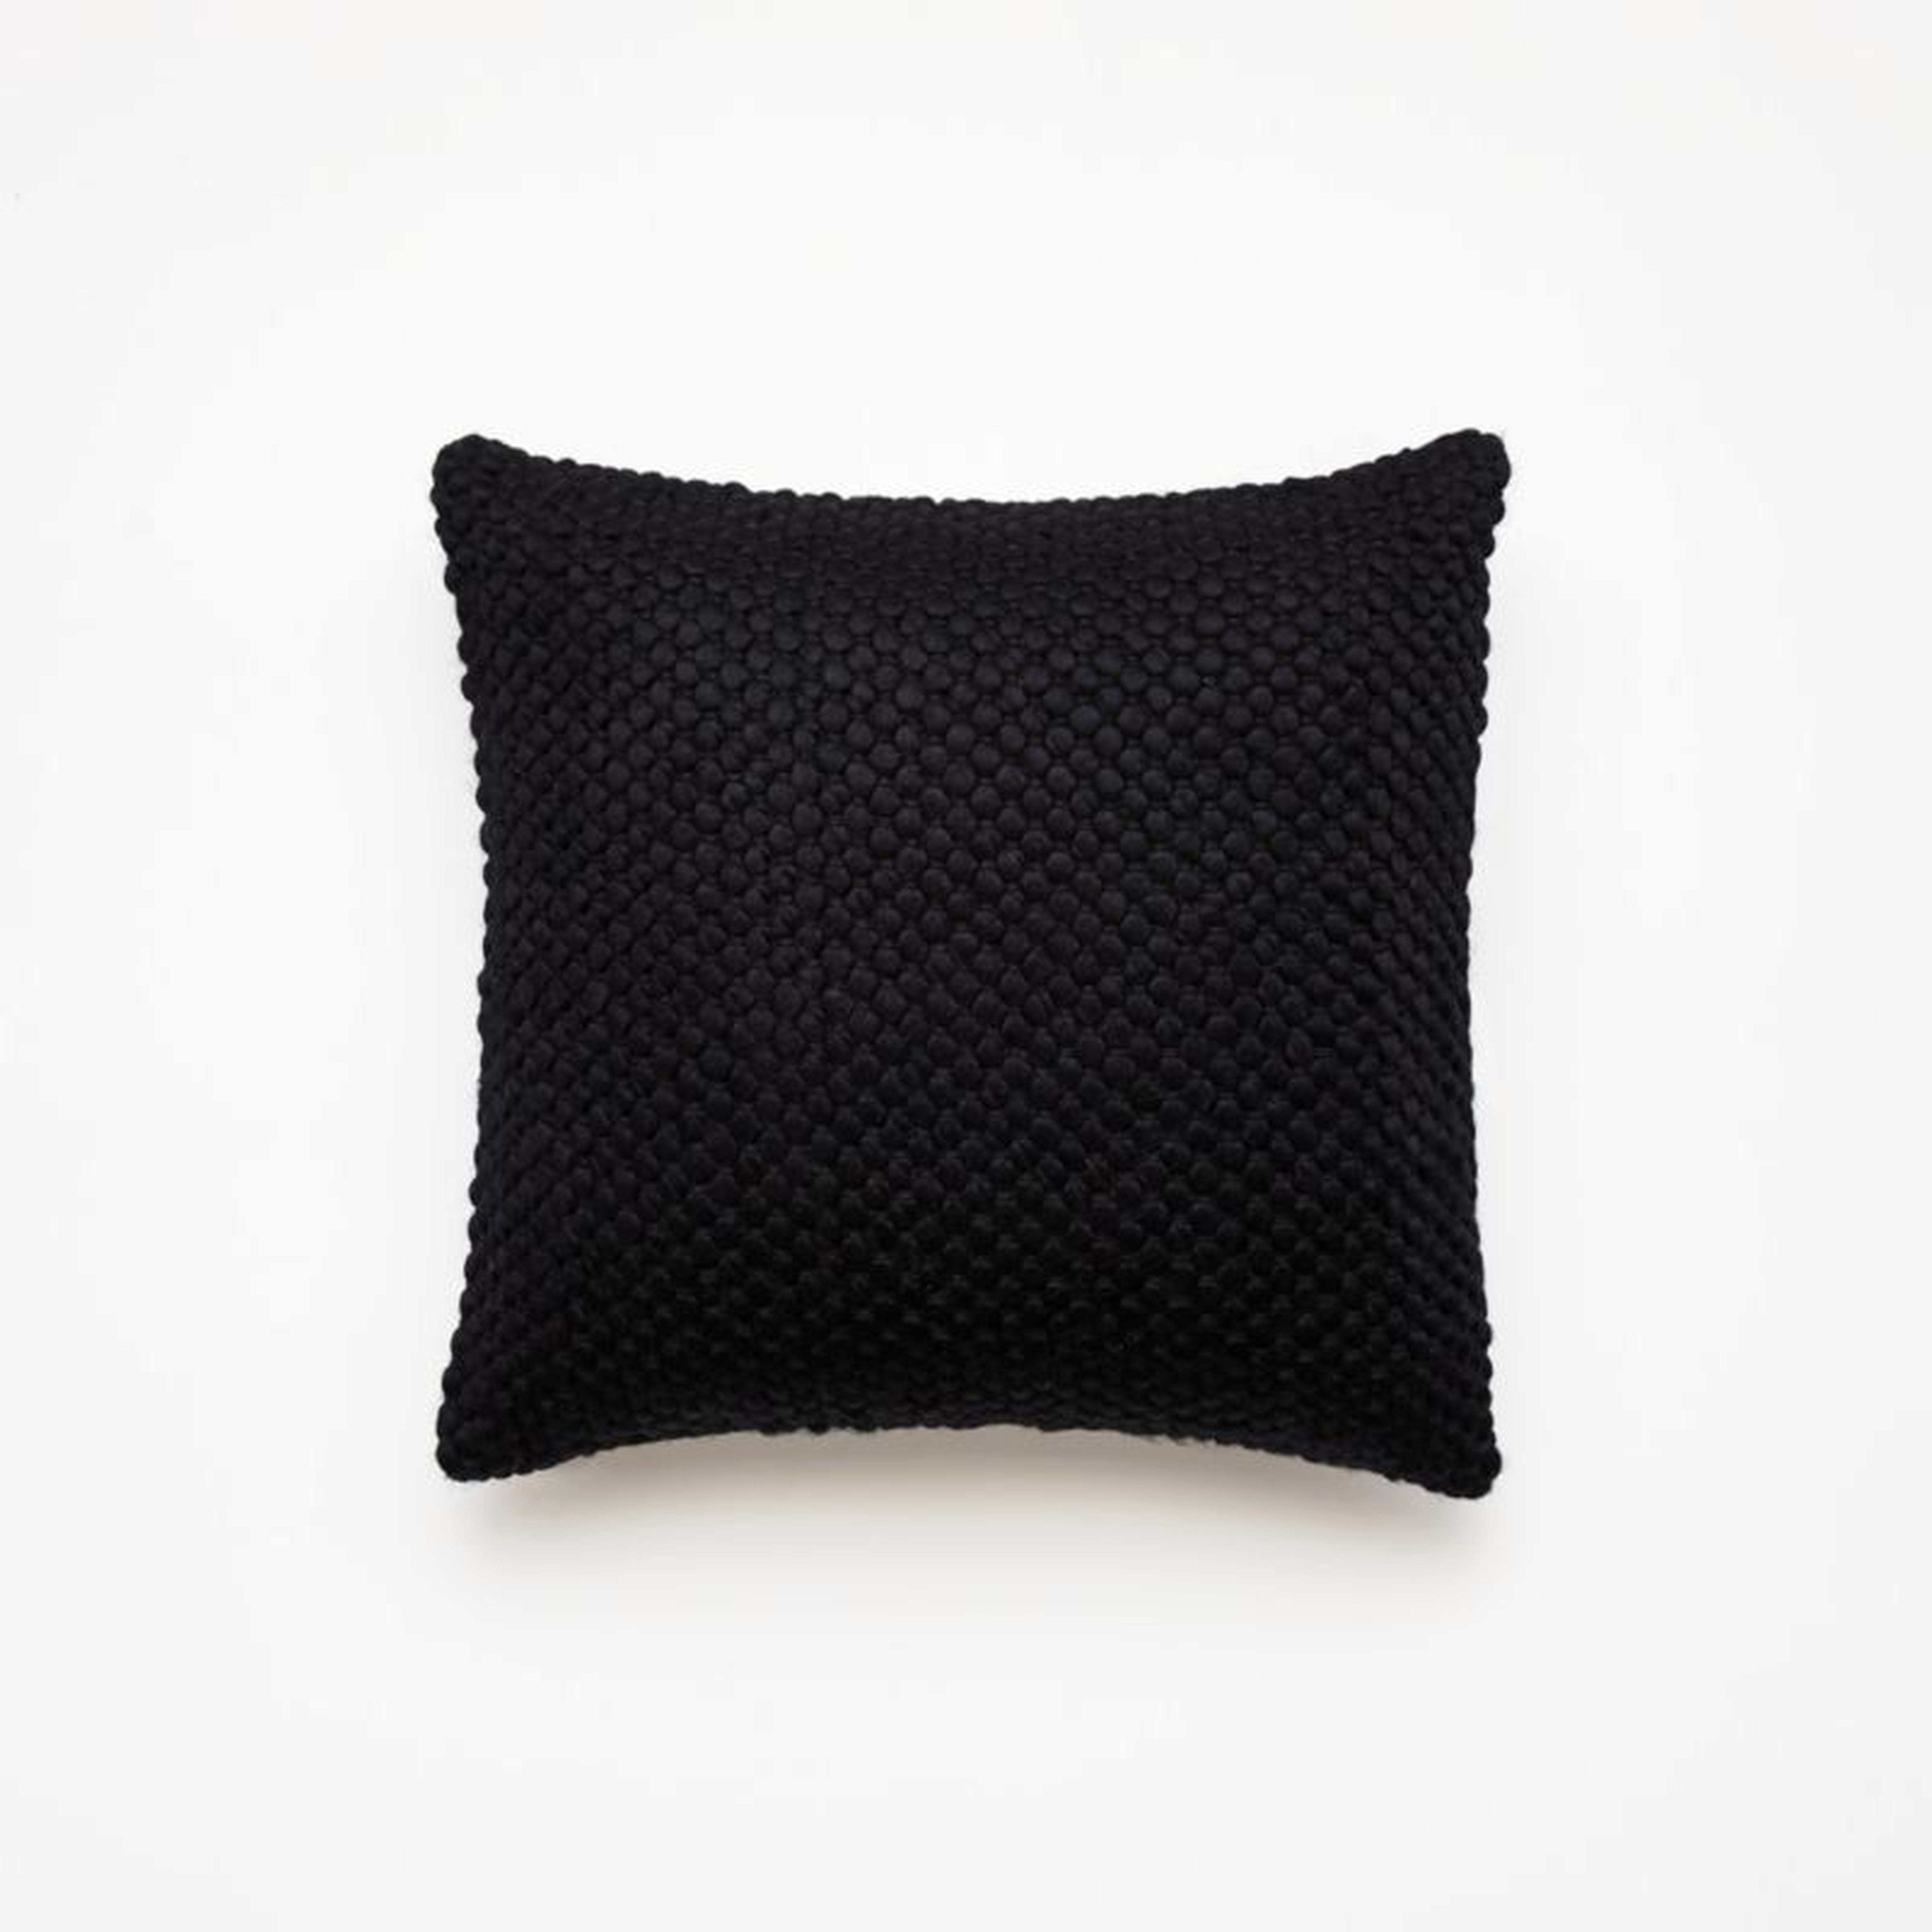 Remy Black Pillow with Feather-Down Insert, 18" x 18" - CB2